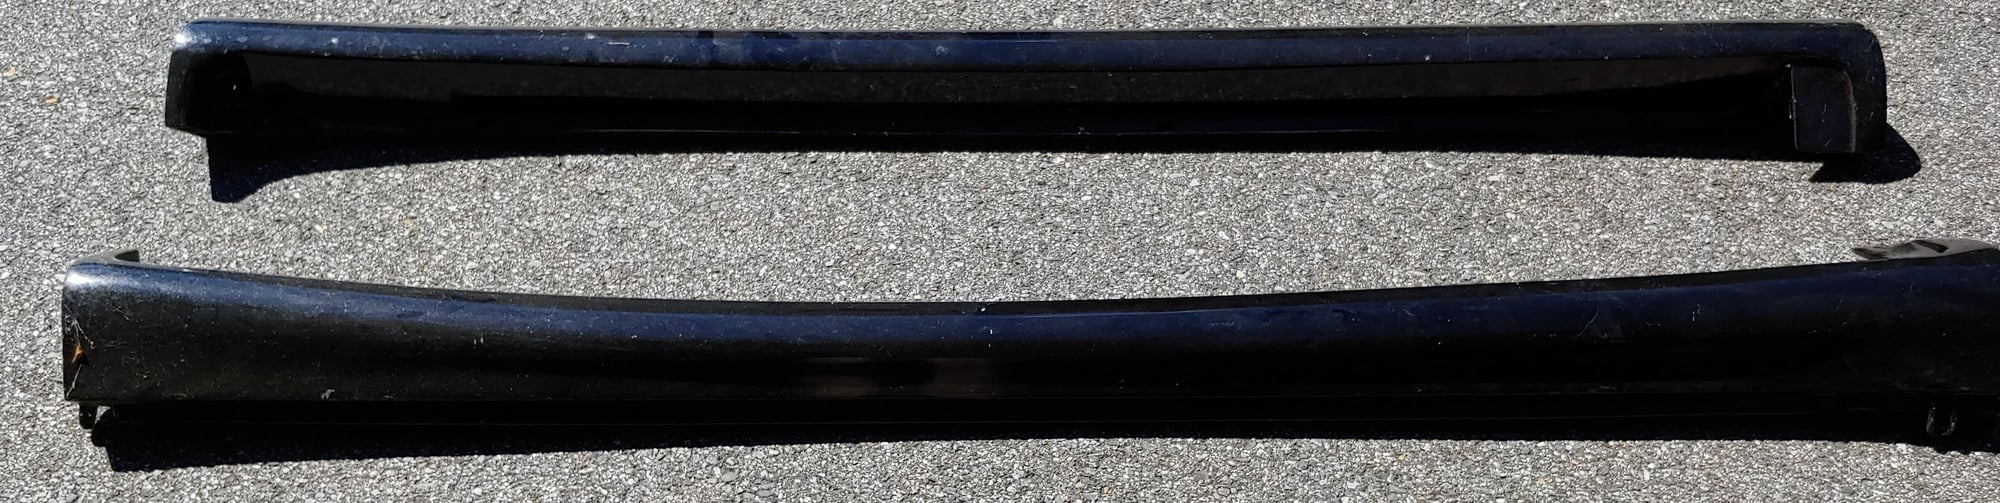 Exterior Body Parts - L Tune Side Skirts - 2GS - Used - 1998 to 2005 Lexus GS430 - 1998 to 2005 Lexus GS300 - Annapolis, MD 21035, United States